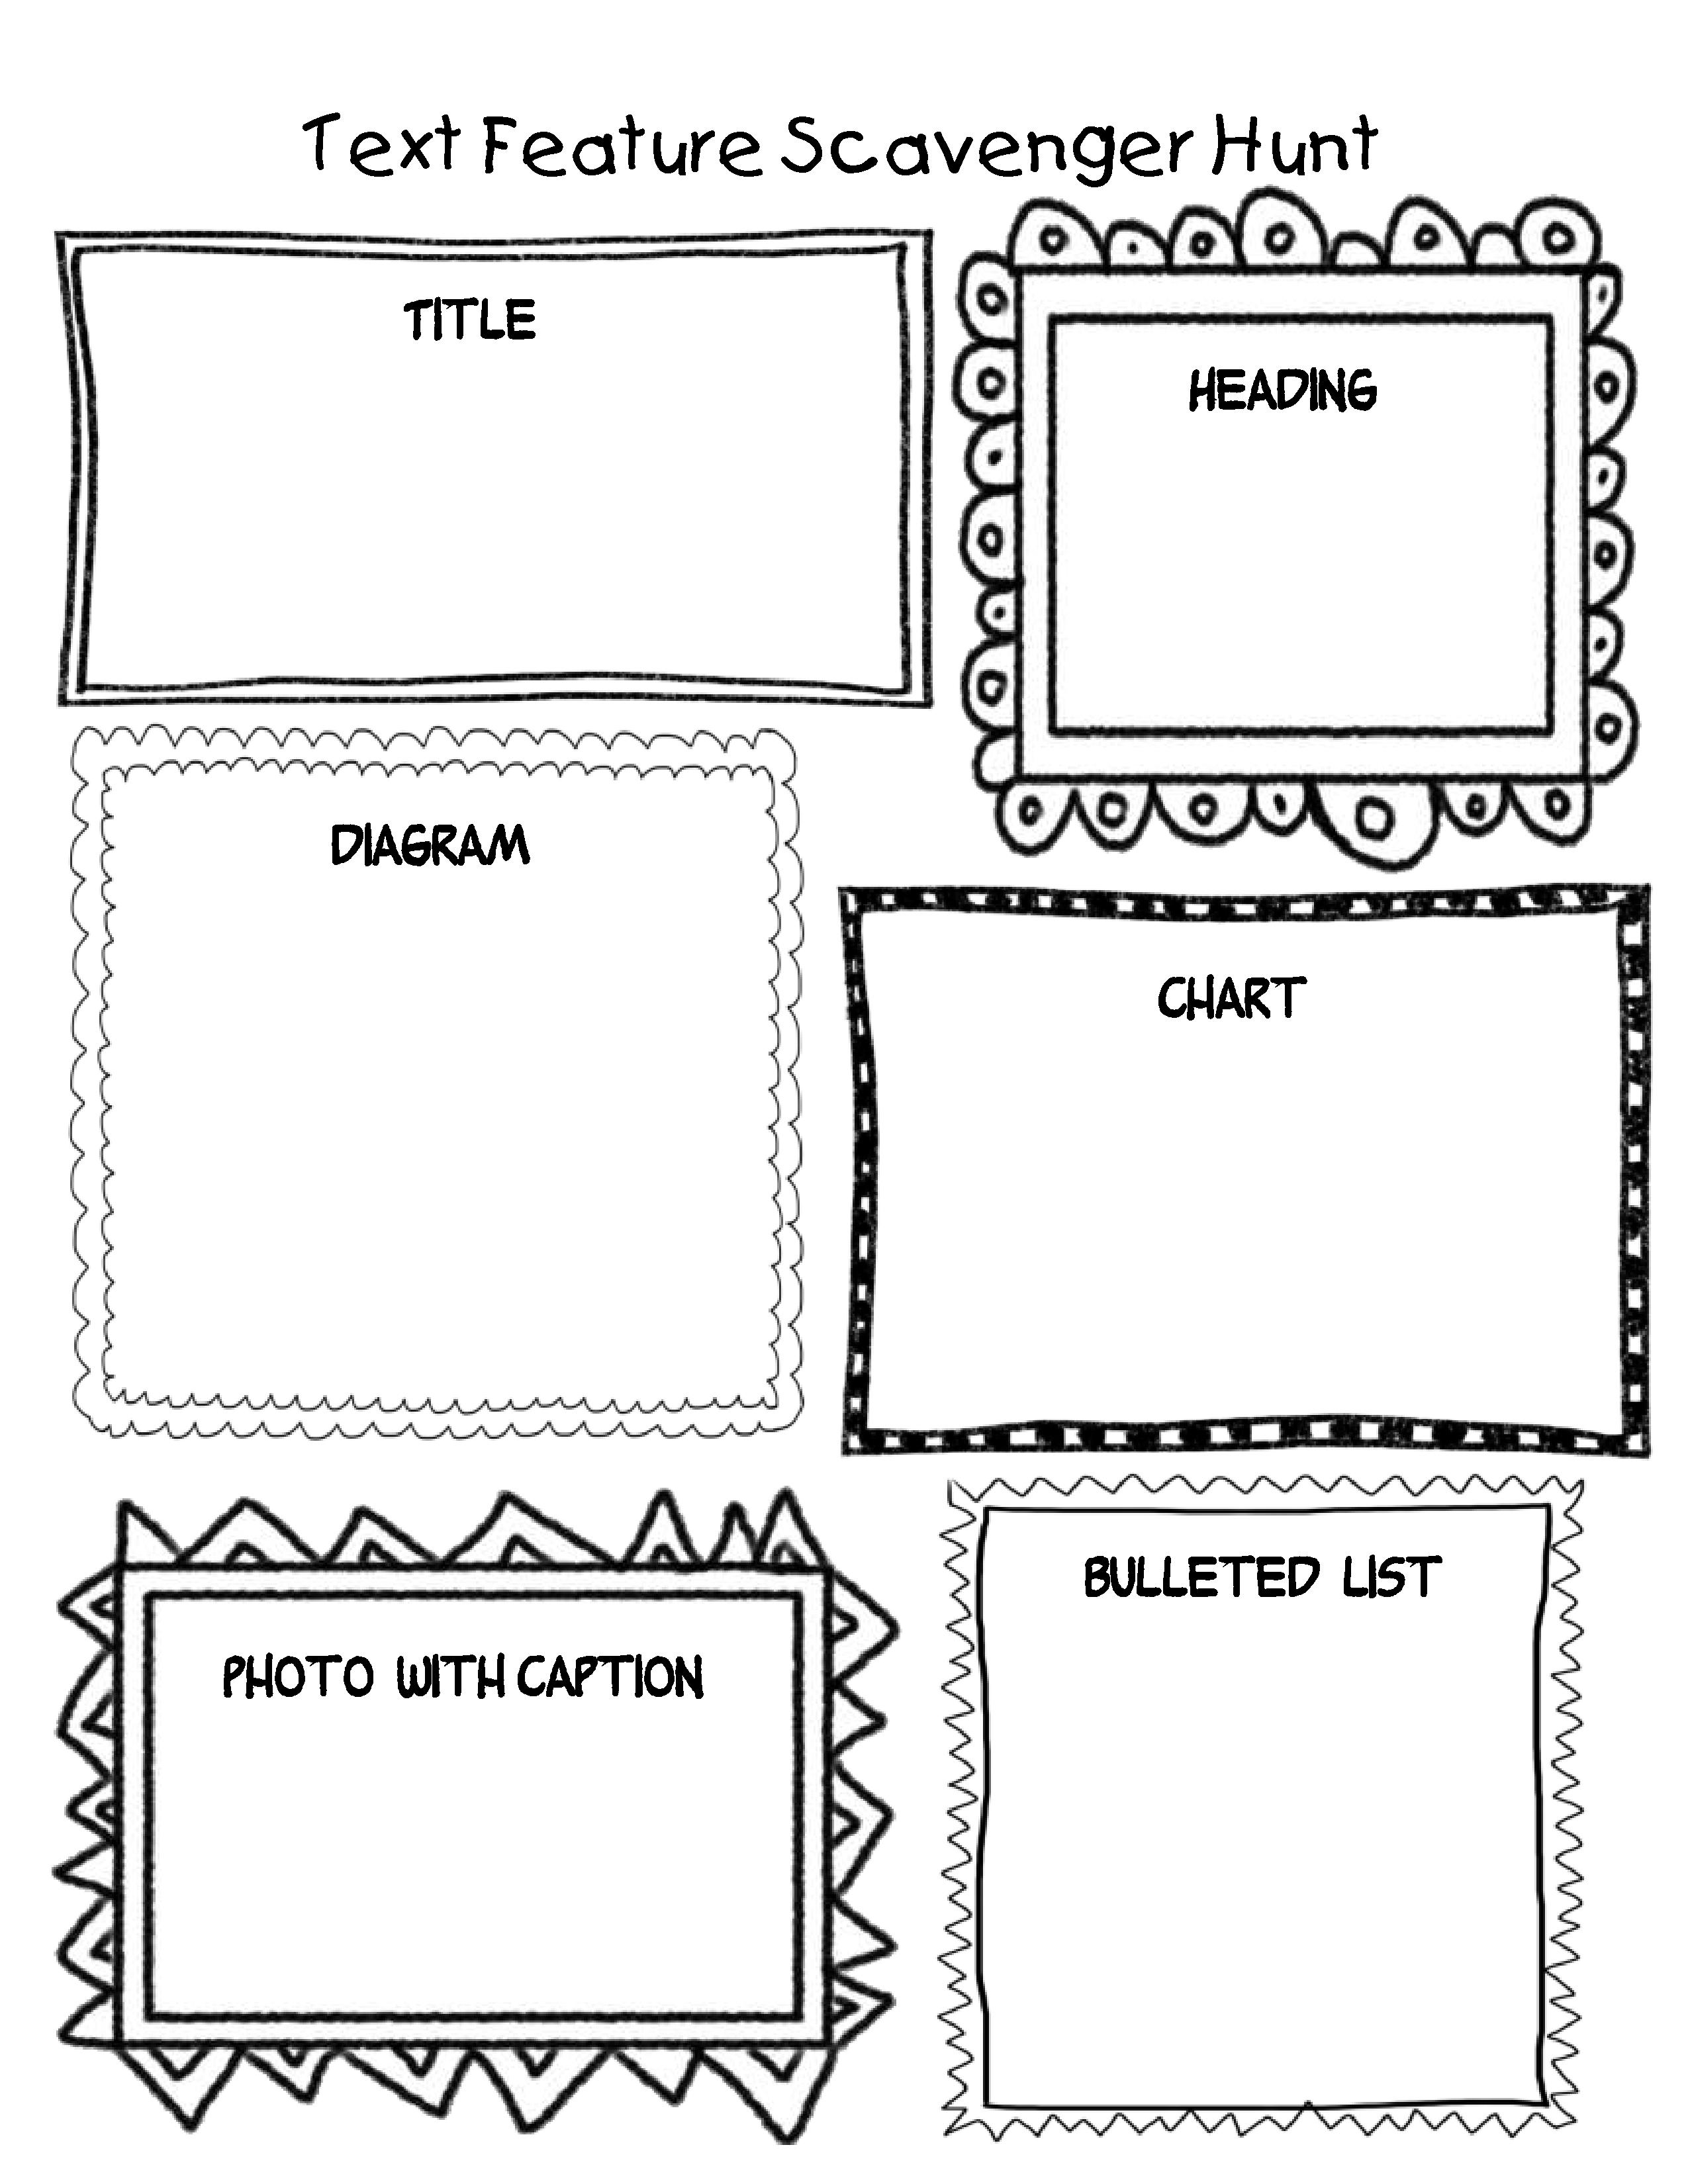 15 Best Images of Fiction And Nonfiction Worksheets 3rd Grade  Fiction and Nonfiction 